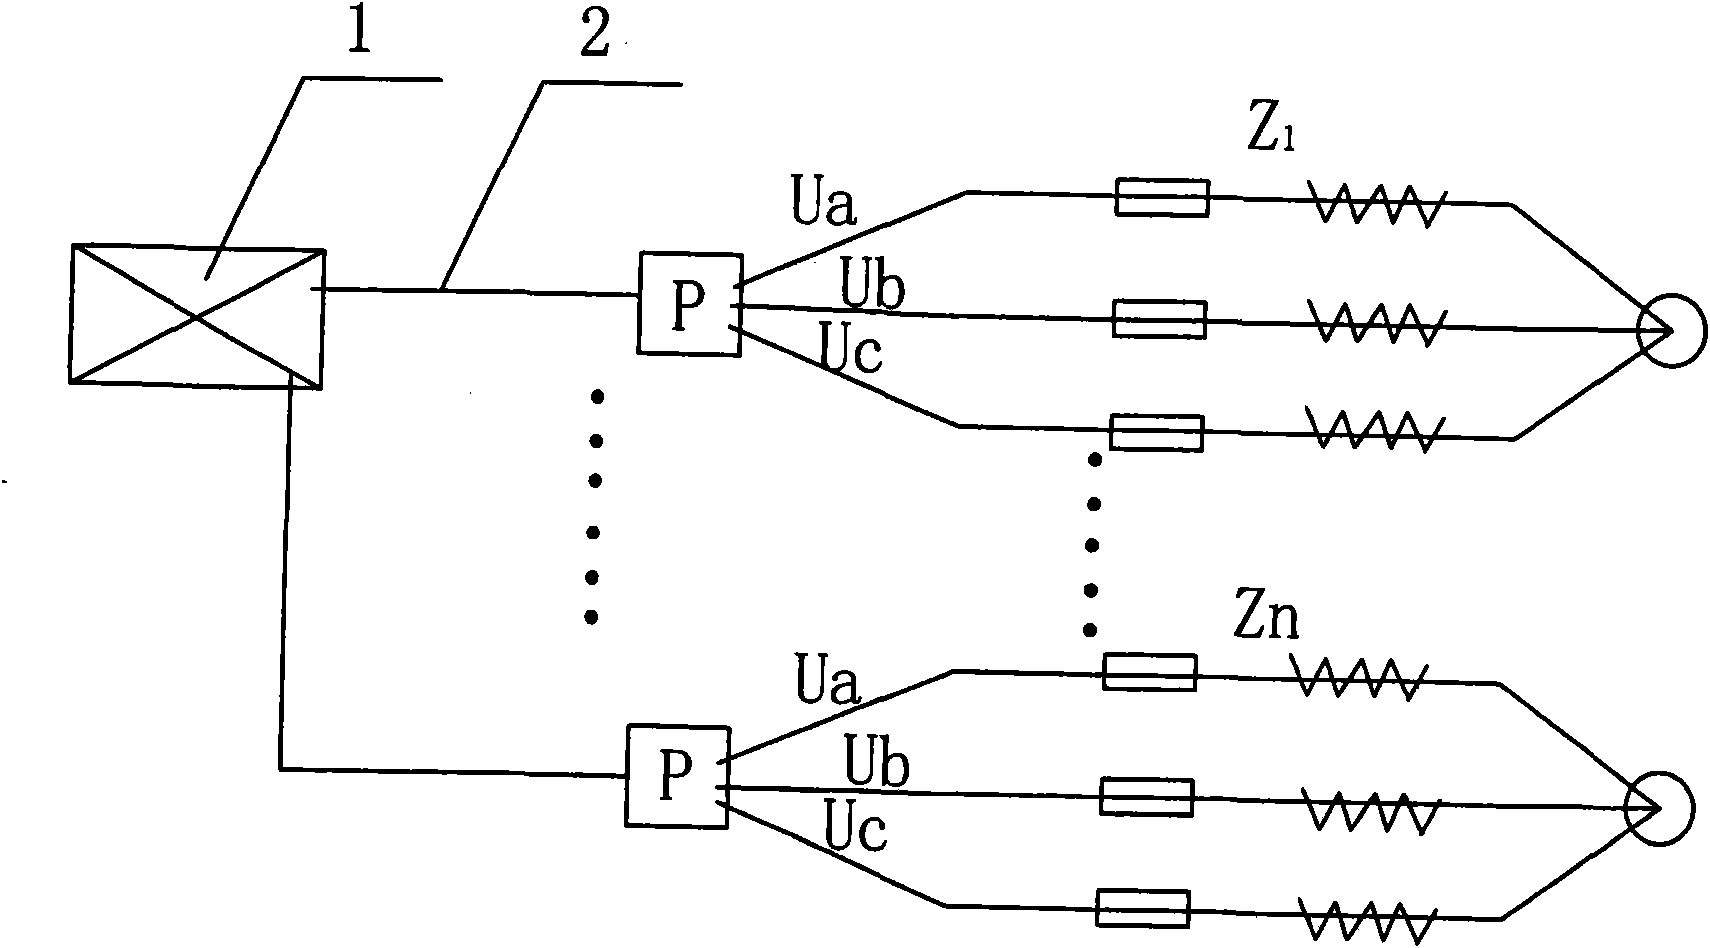 Power distribution device for improving active power of series electric tracer heating system